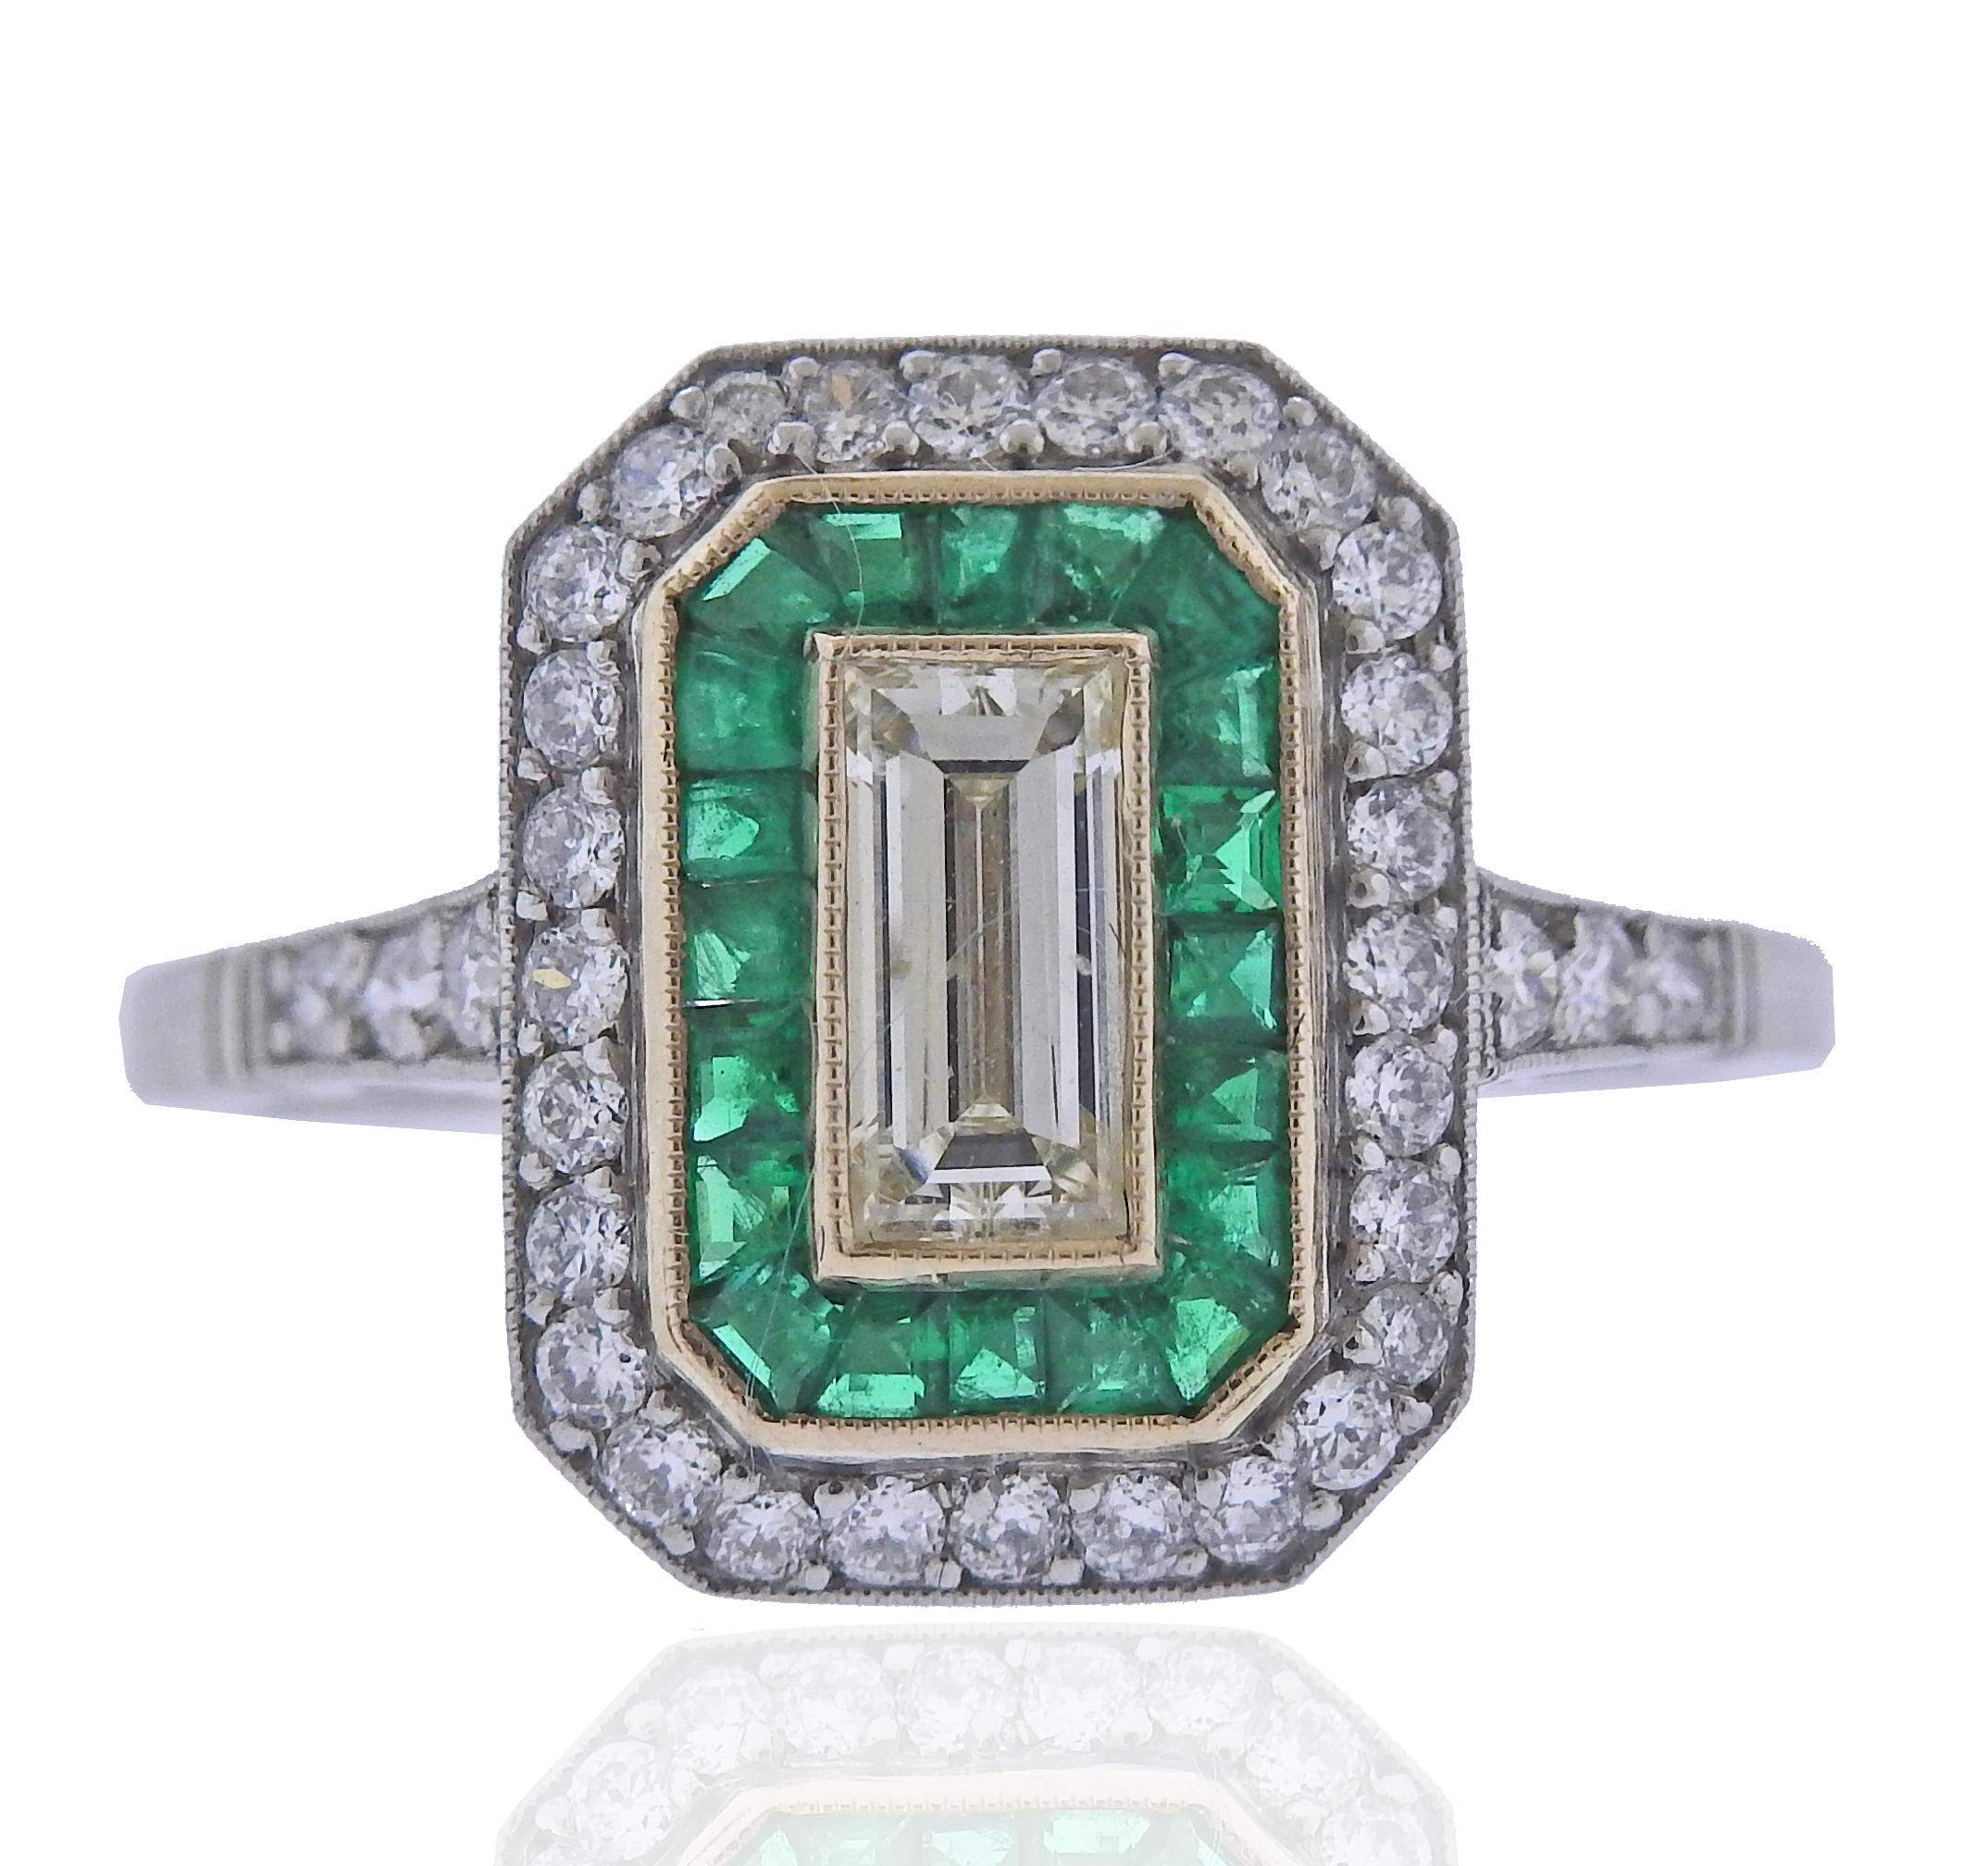 Platinum engagement ring with emeralds and approx. 1.03ctw in diamonds (center is approx. 0.63ct). Ring size 8 (EU 57), top is 15 x 11.5mm. Weight 4 grams. 